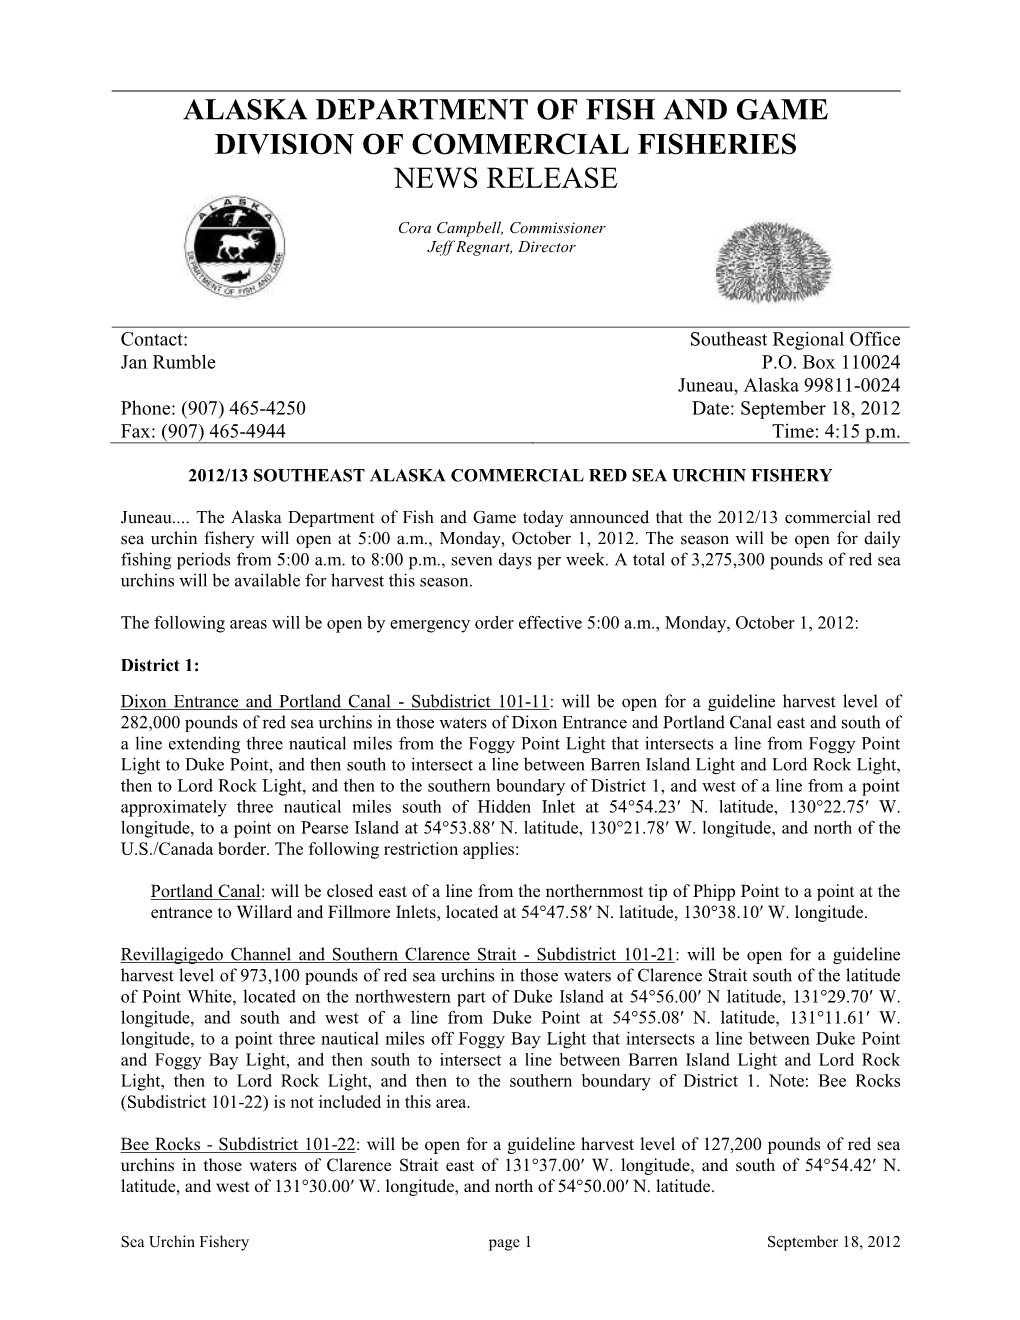 Alaska Department of Fish and Game Division of Commercial Fisheries News Release